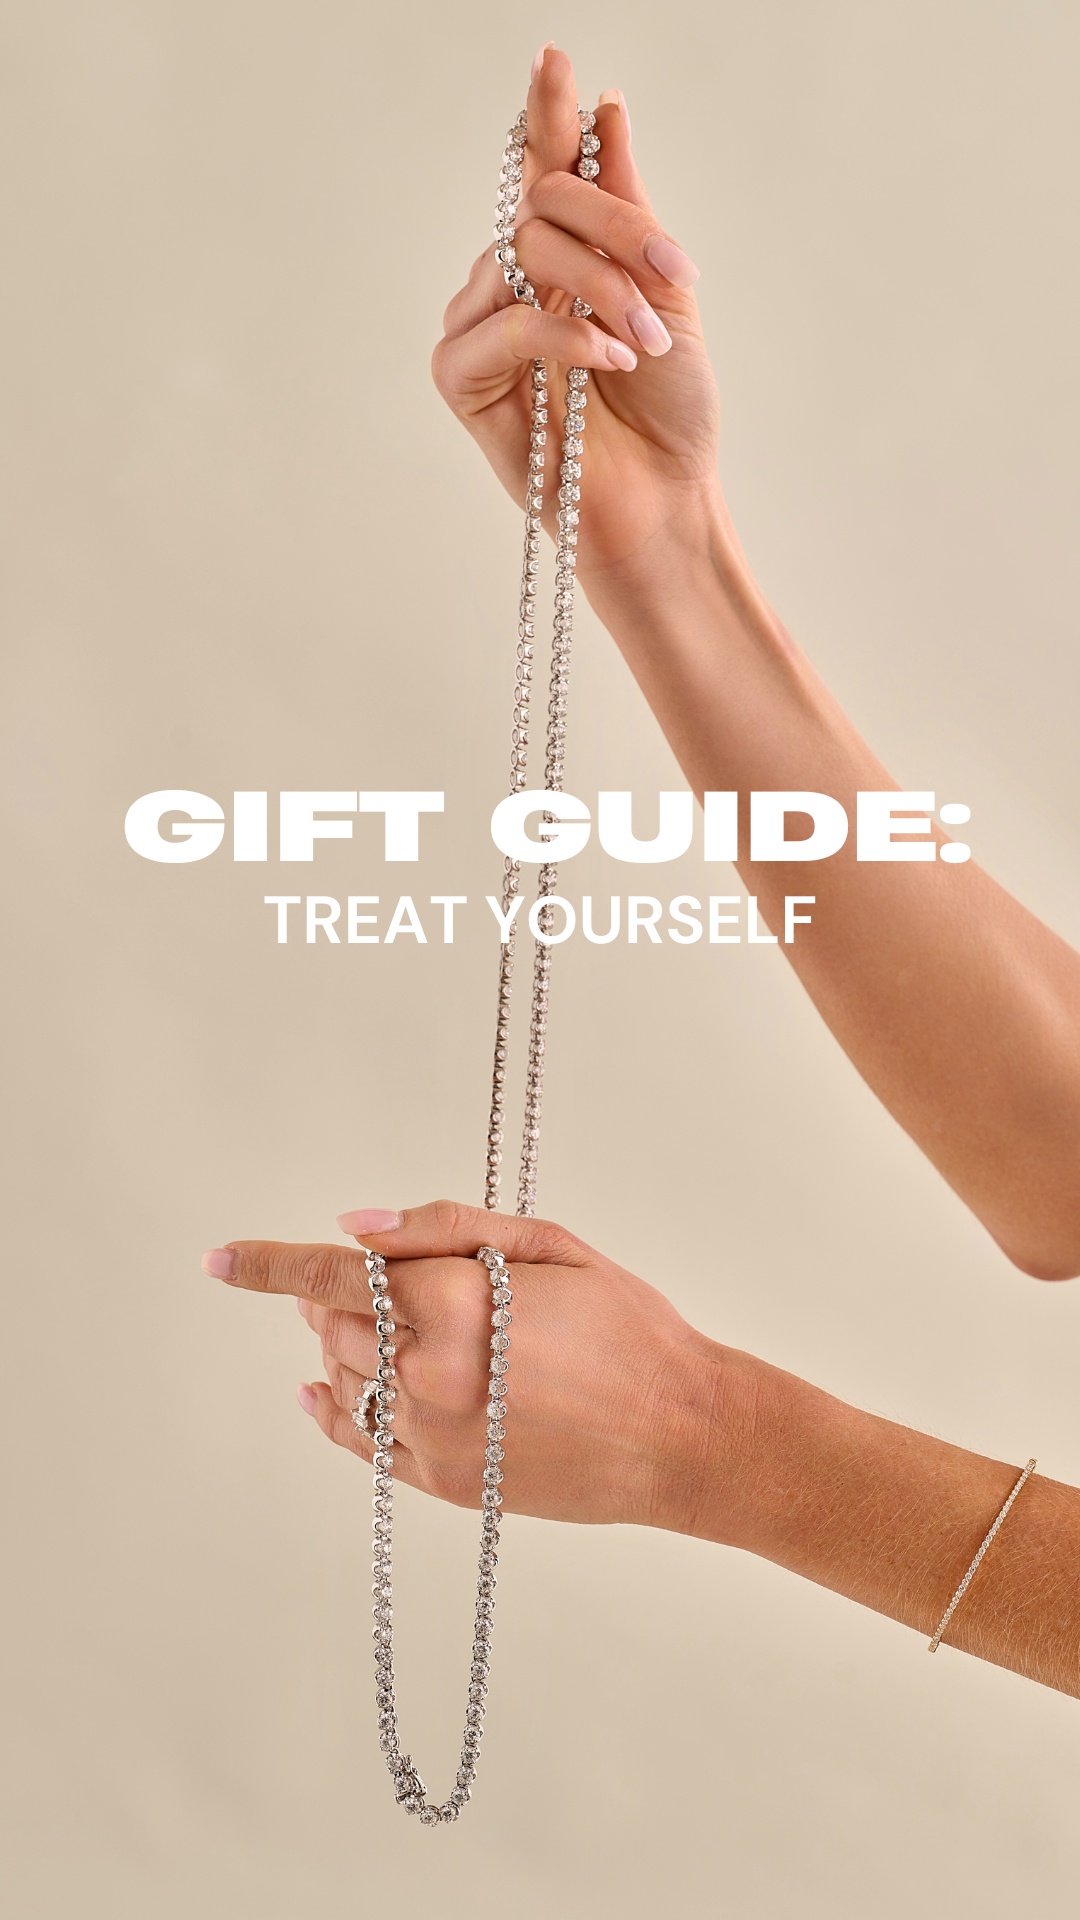 Gift Guide: Treat Yourself